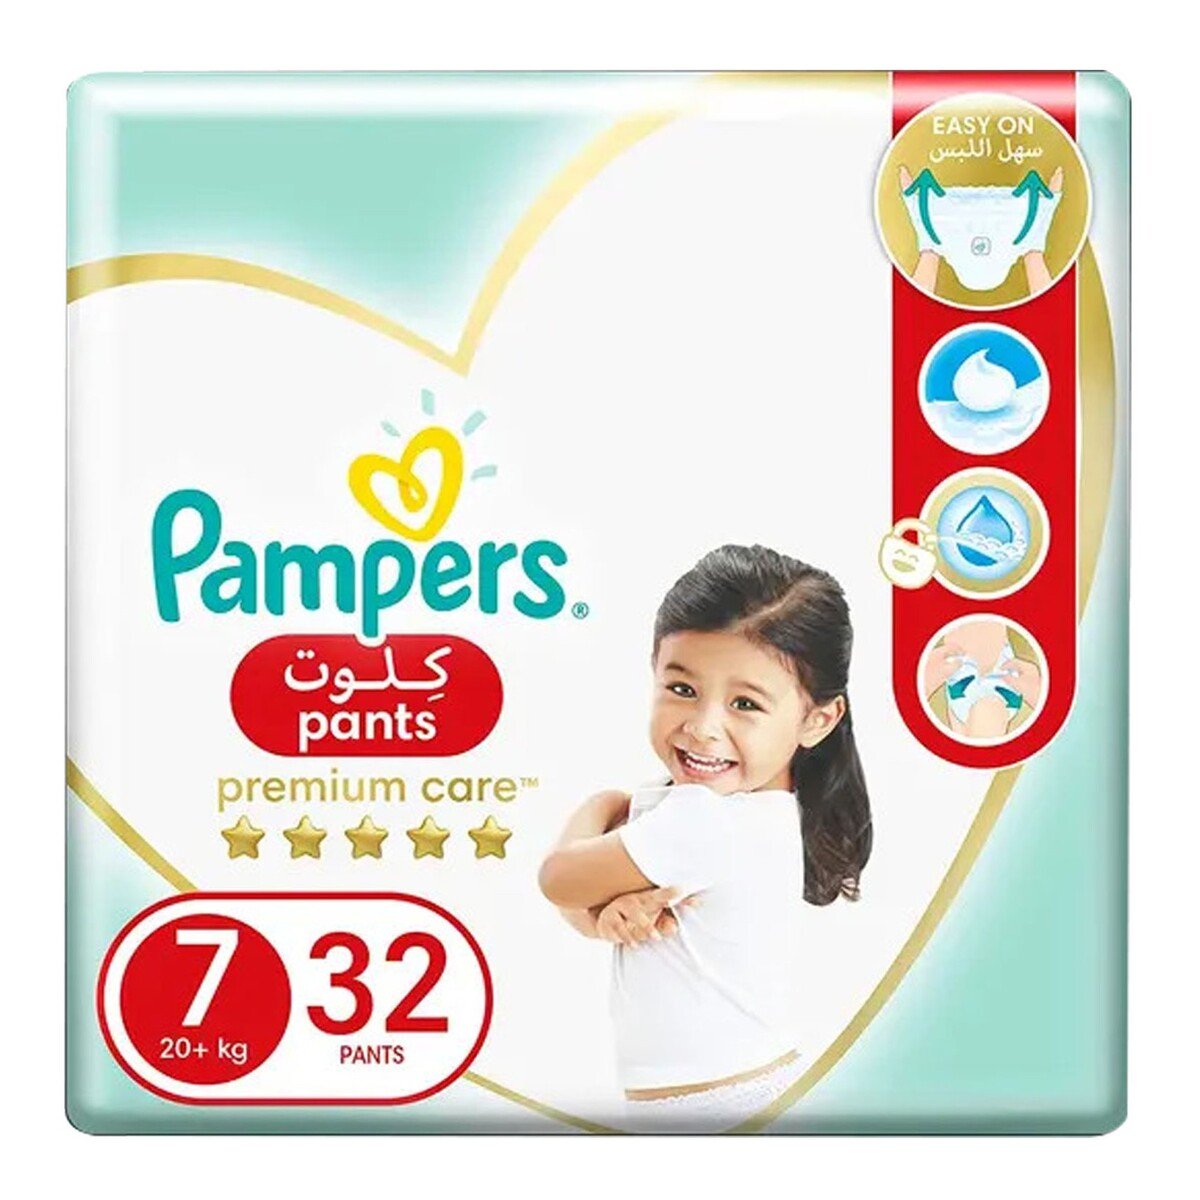 Buy Pampers Premium Care Diaper Pants Size 7, 20+kg 32 pcs Online at Best Price | Baby Trainer Pants | Lulu Kuwait in Kuwait